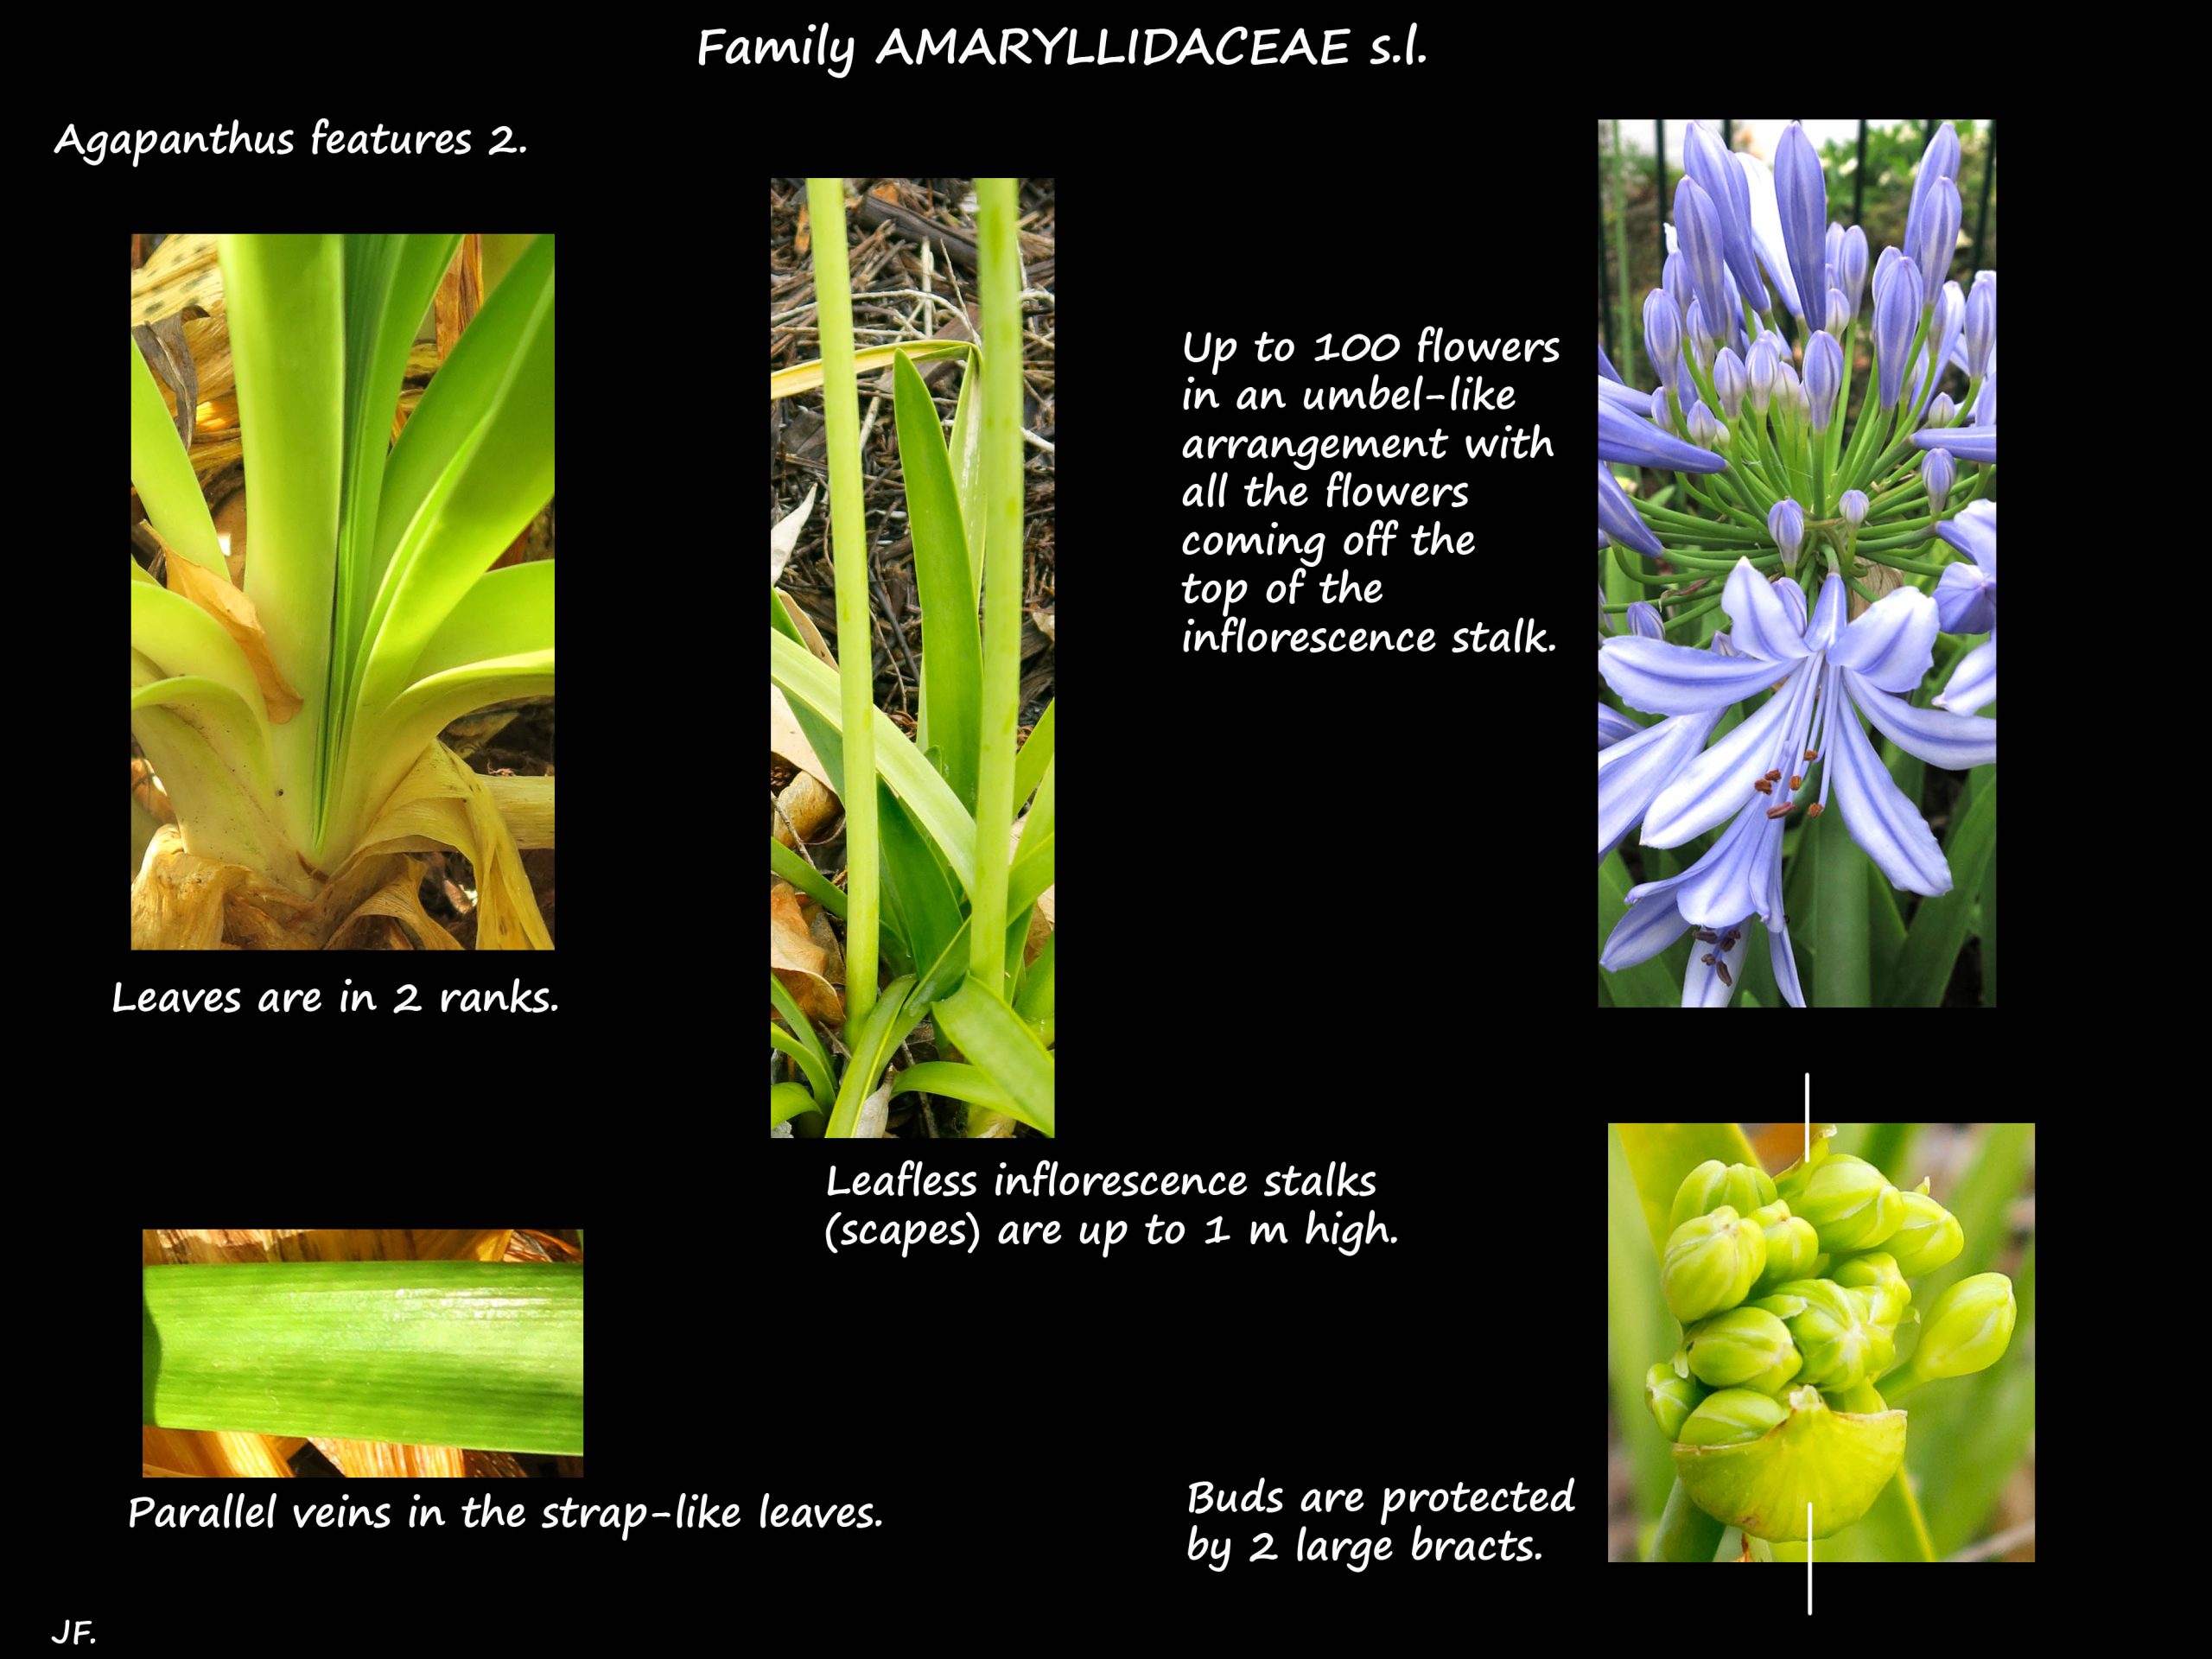 2 Agapanthus leaves & inflorescence bracts